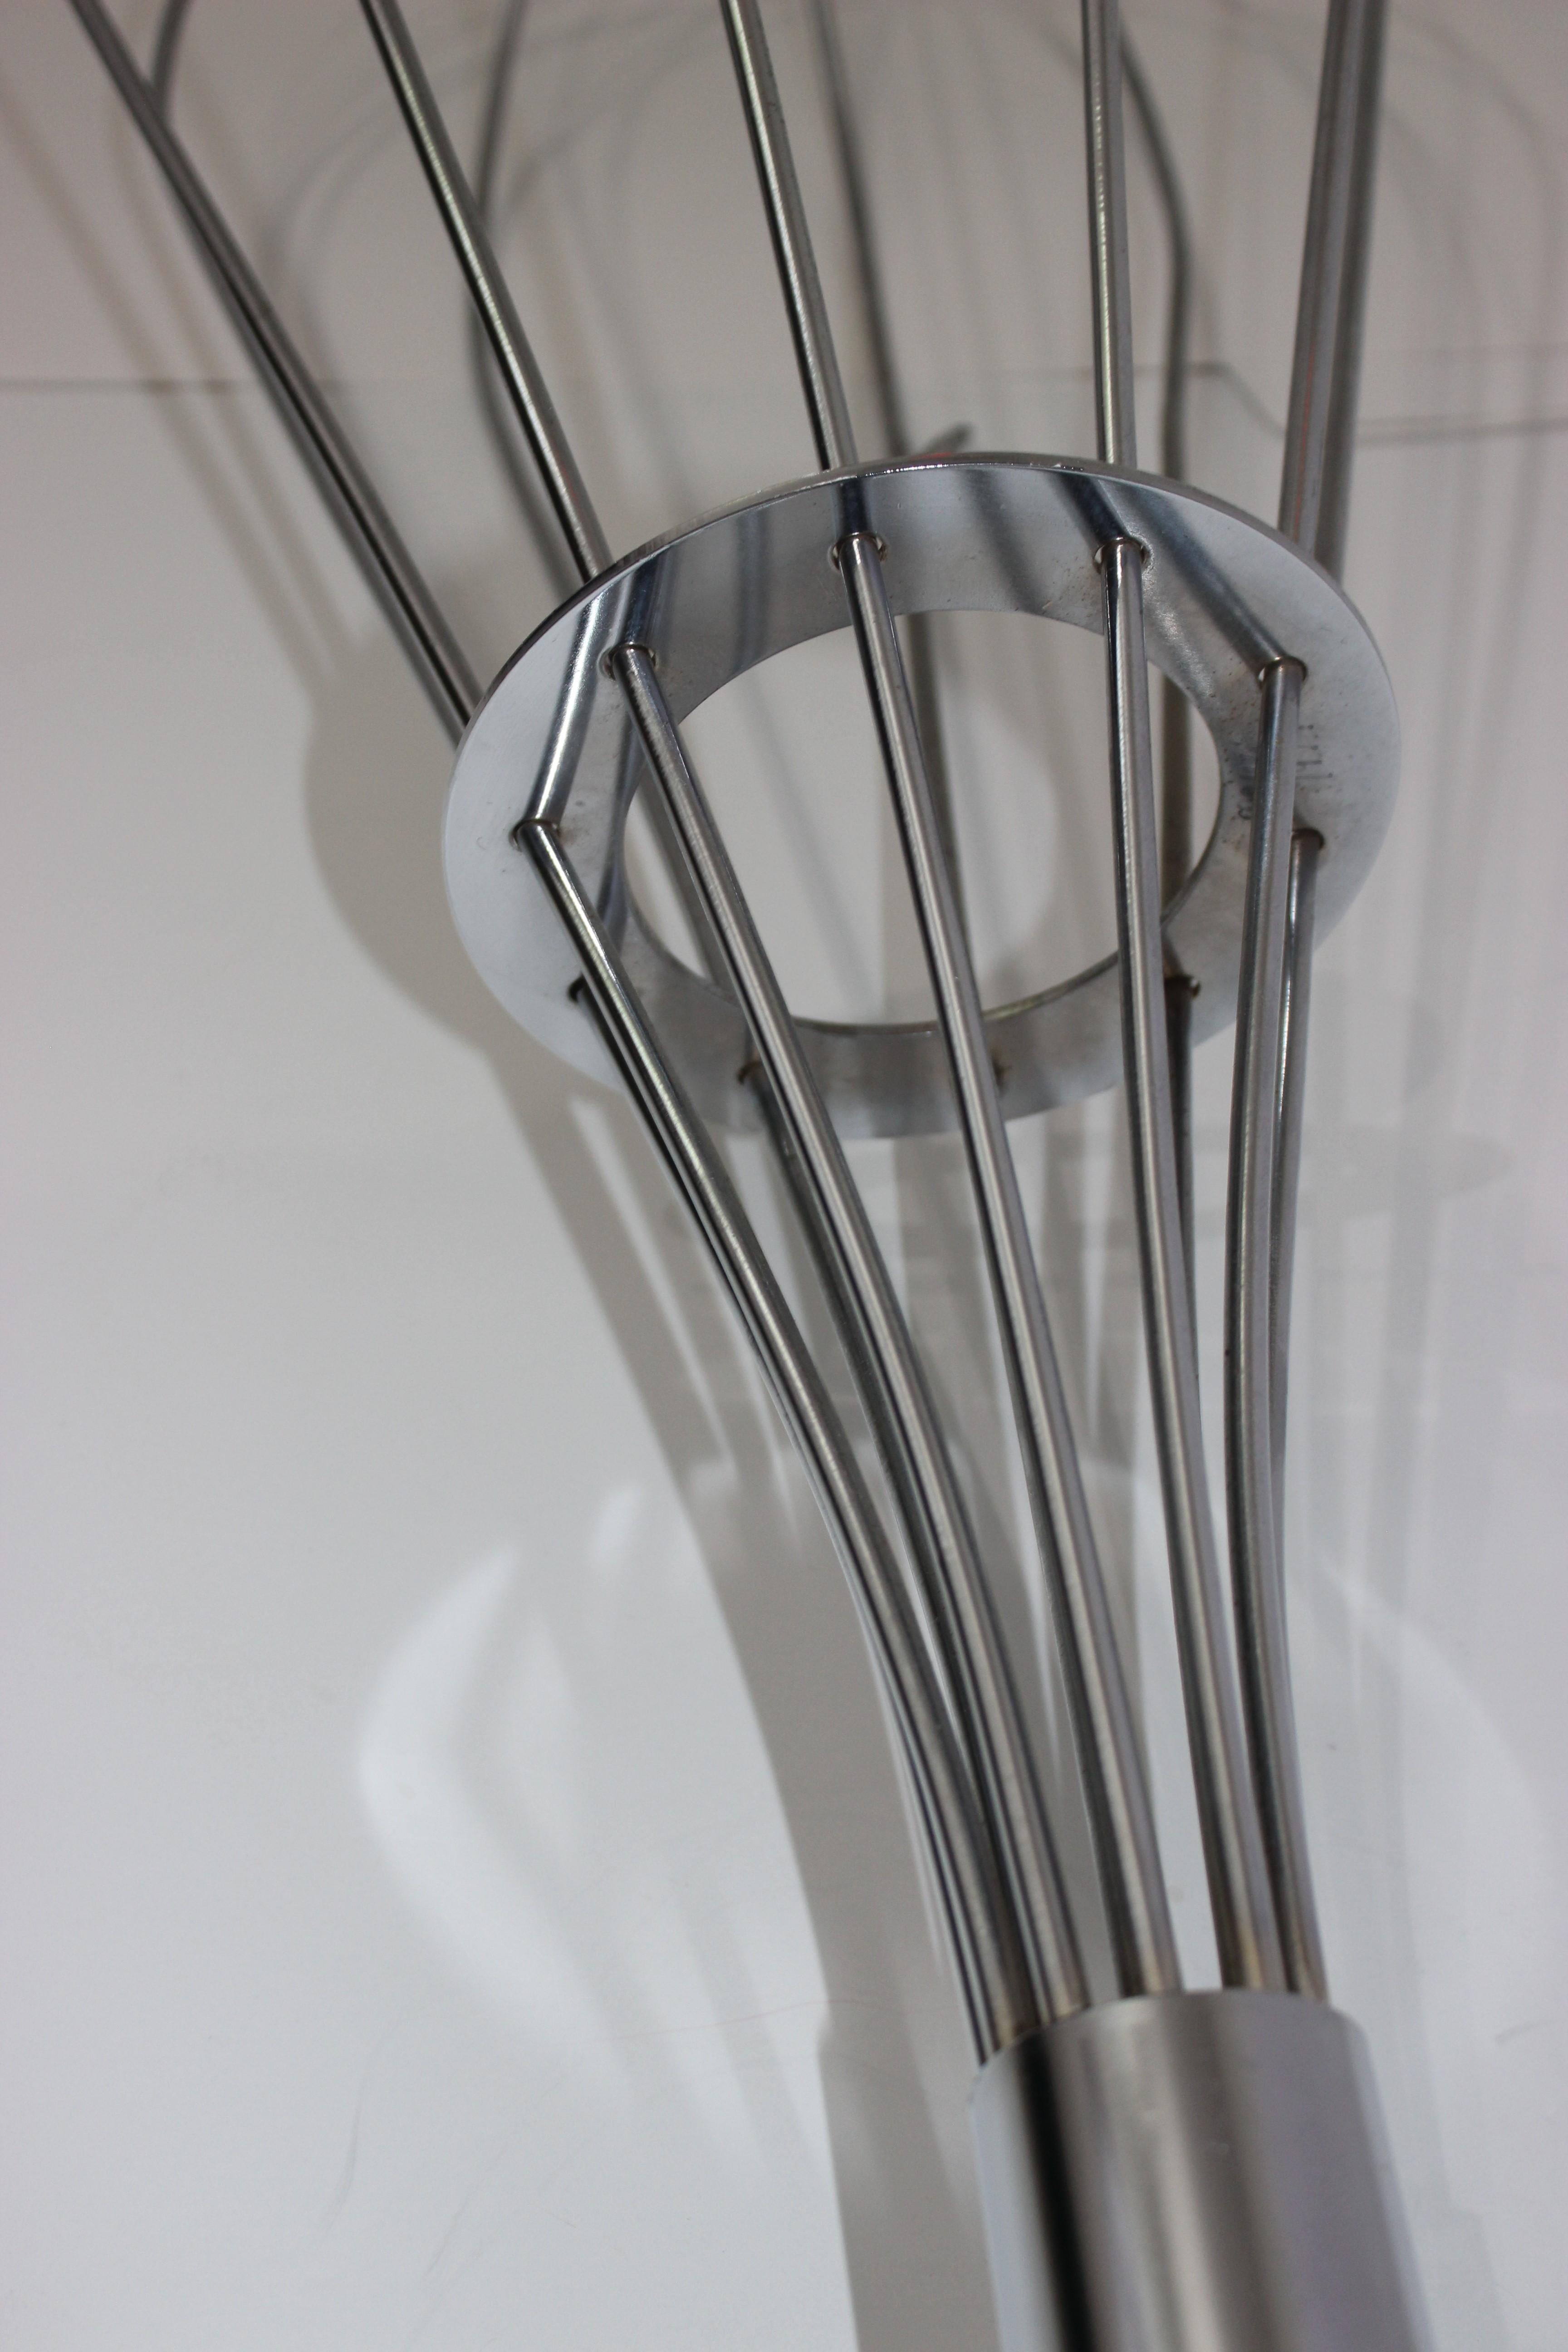 Wisk Wall Sculpture by Curtis Jere 6